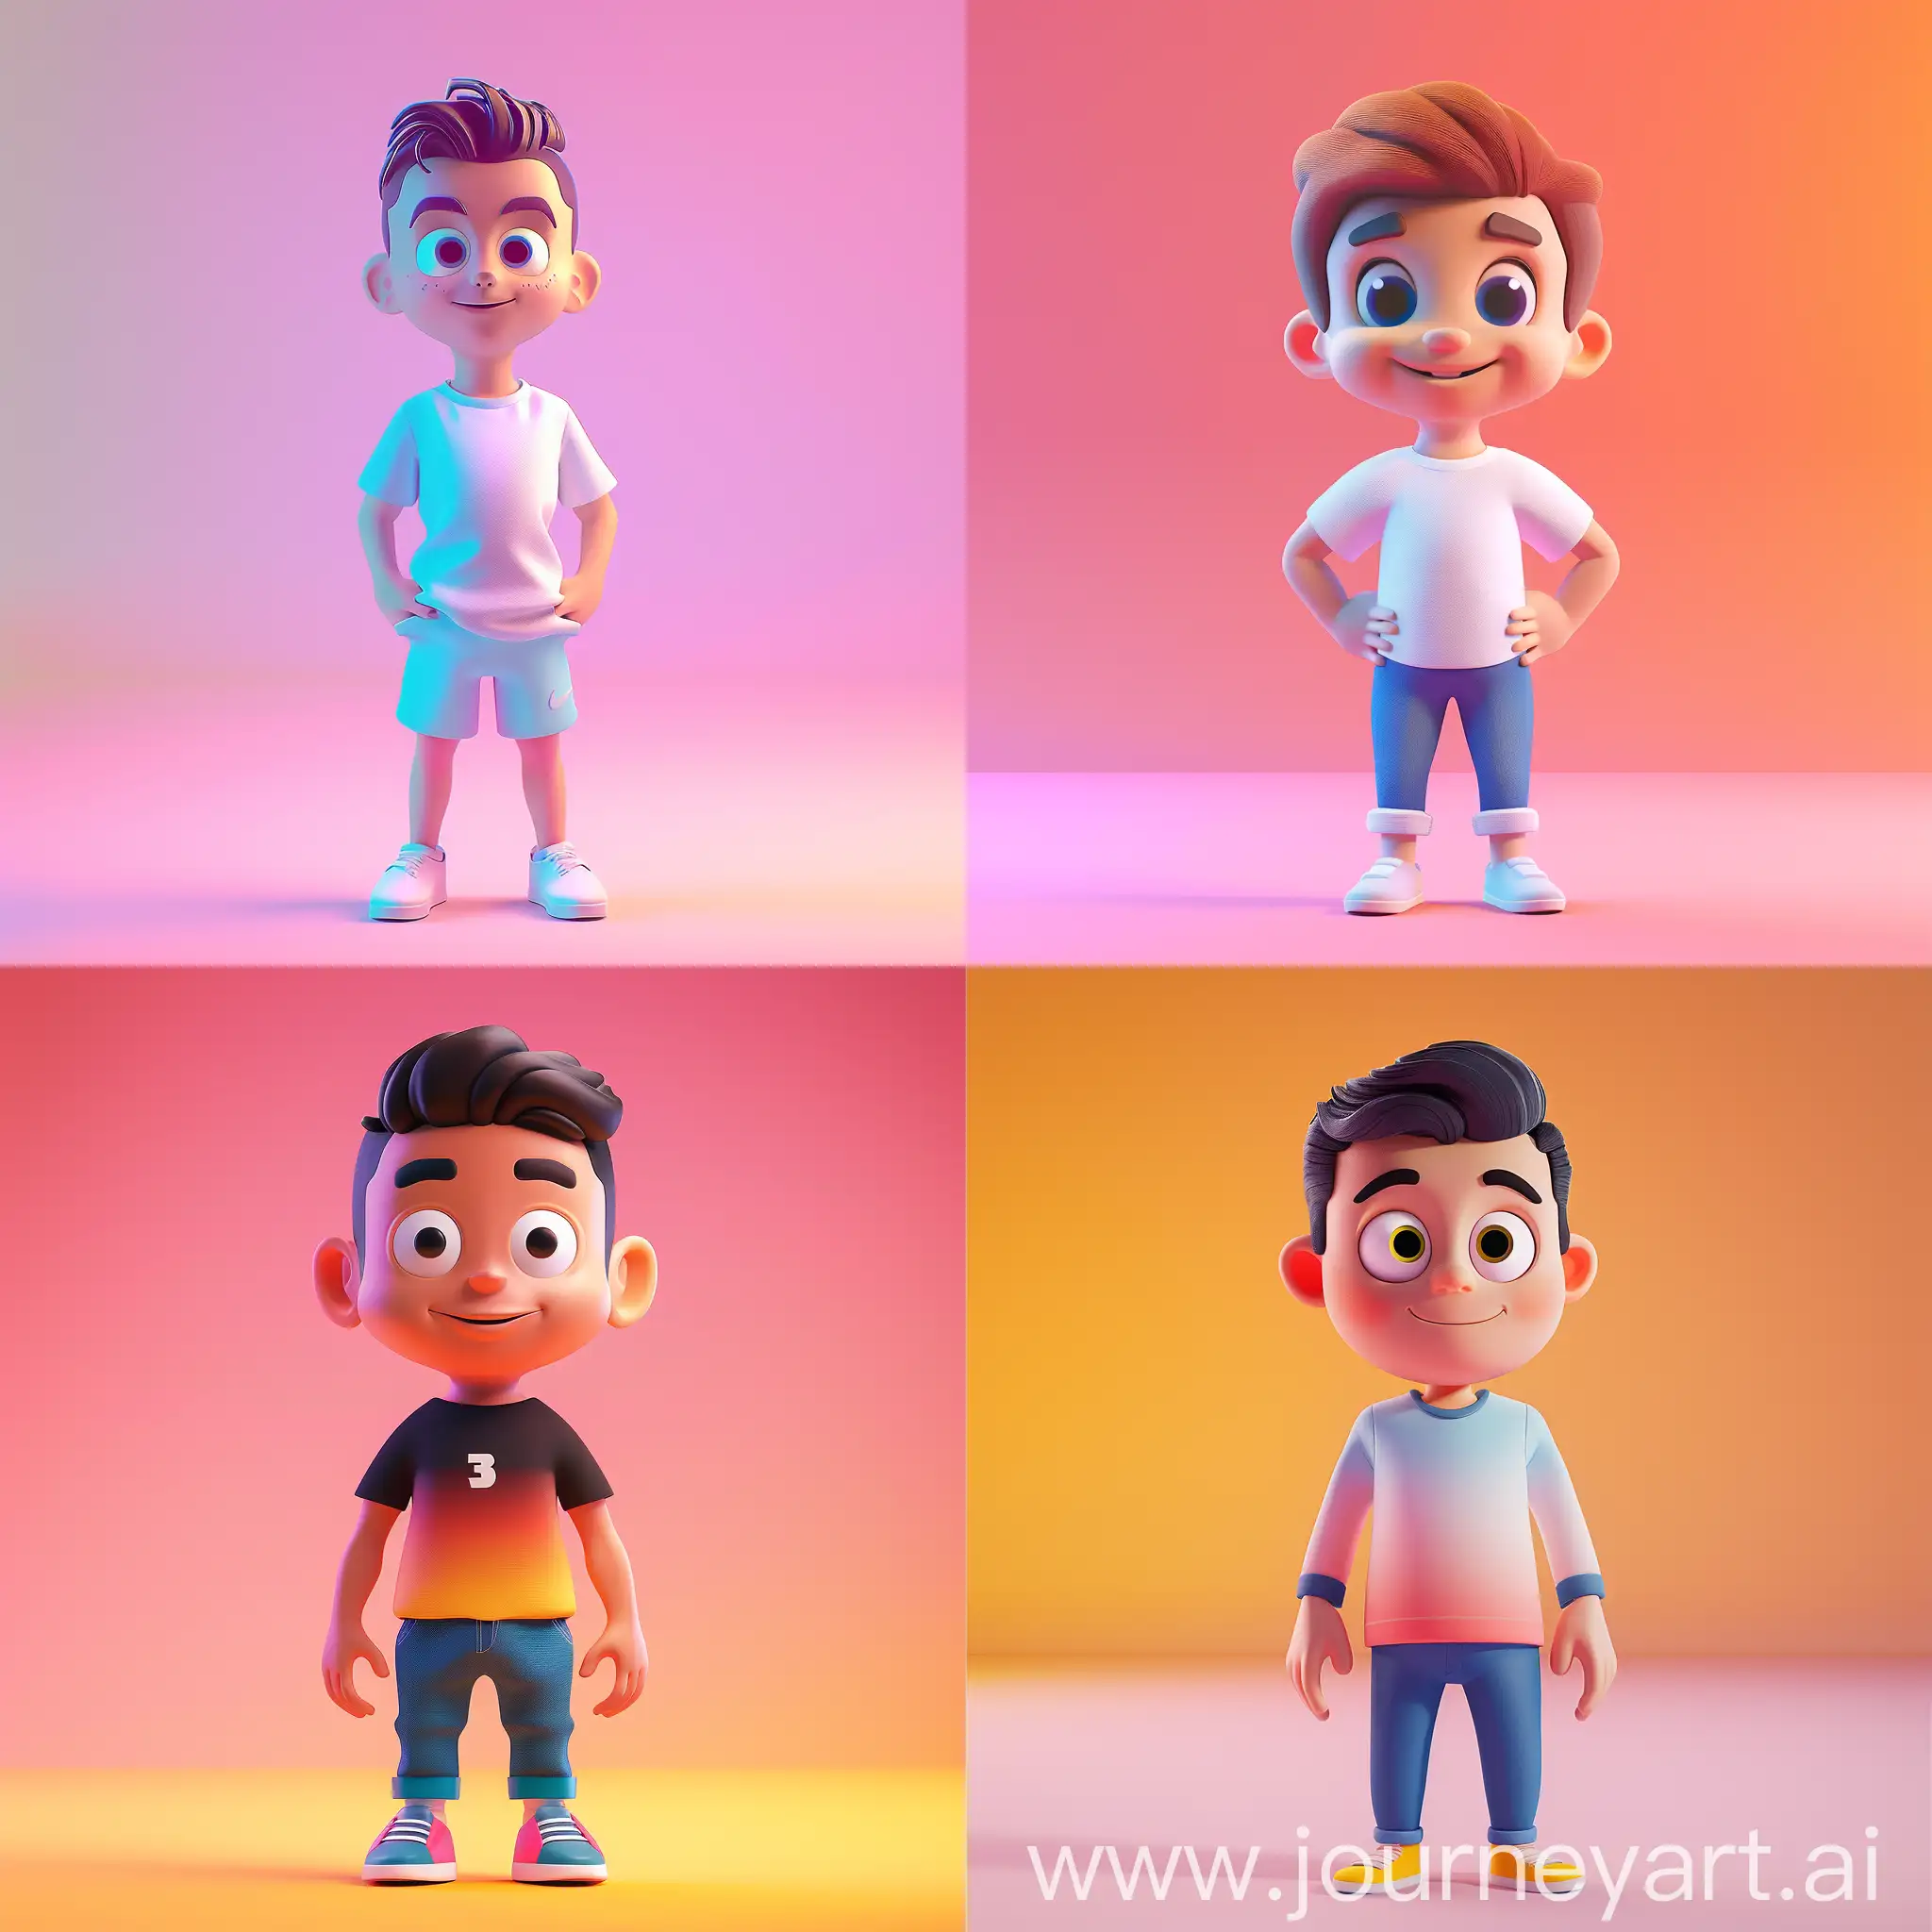 Colorful-3D-Render-of-Cristiano-Ronaldo-with-Happy-Face-on-Gradient-Background